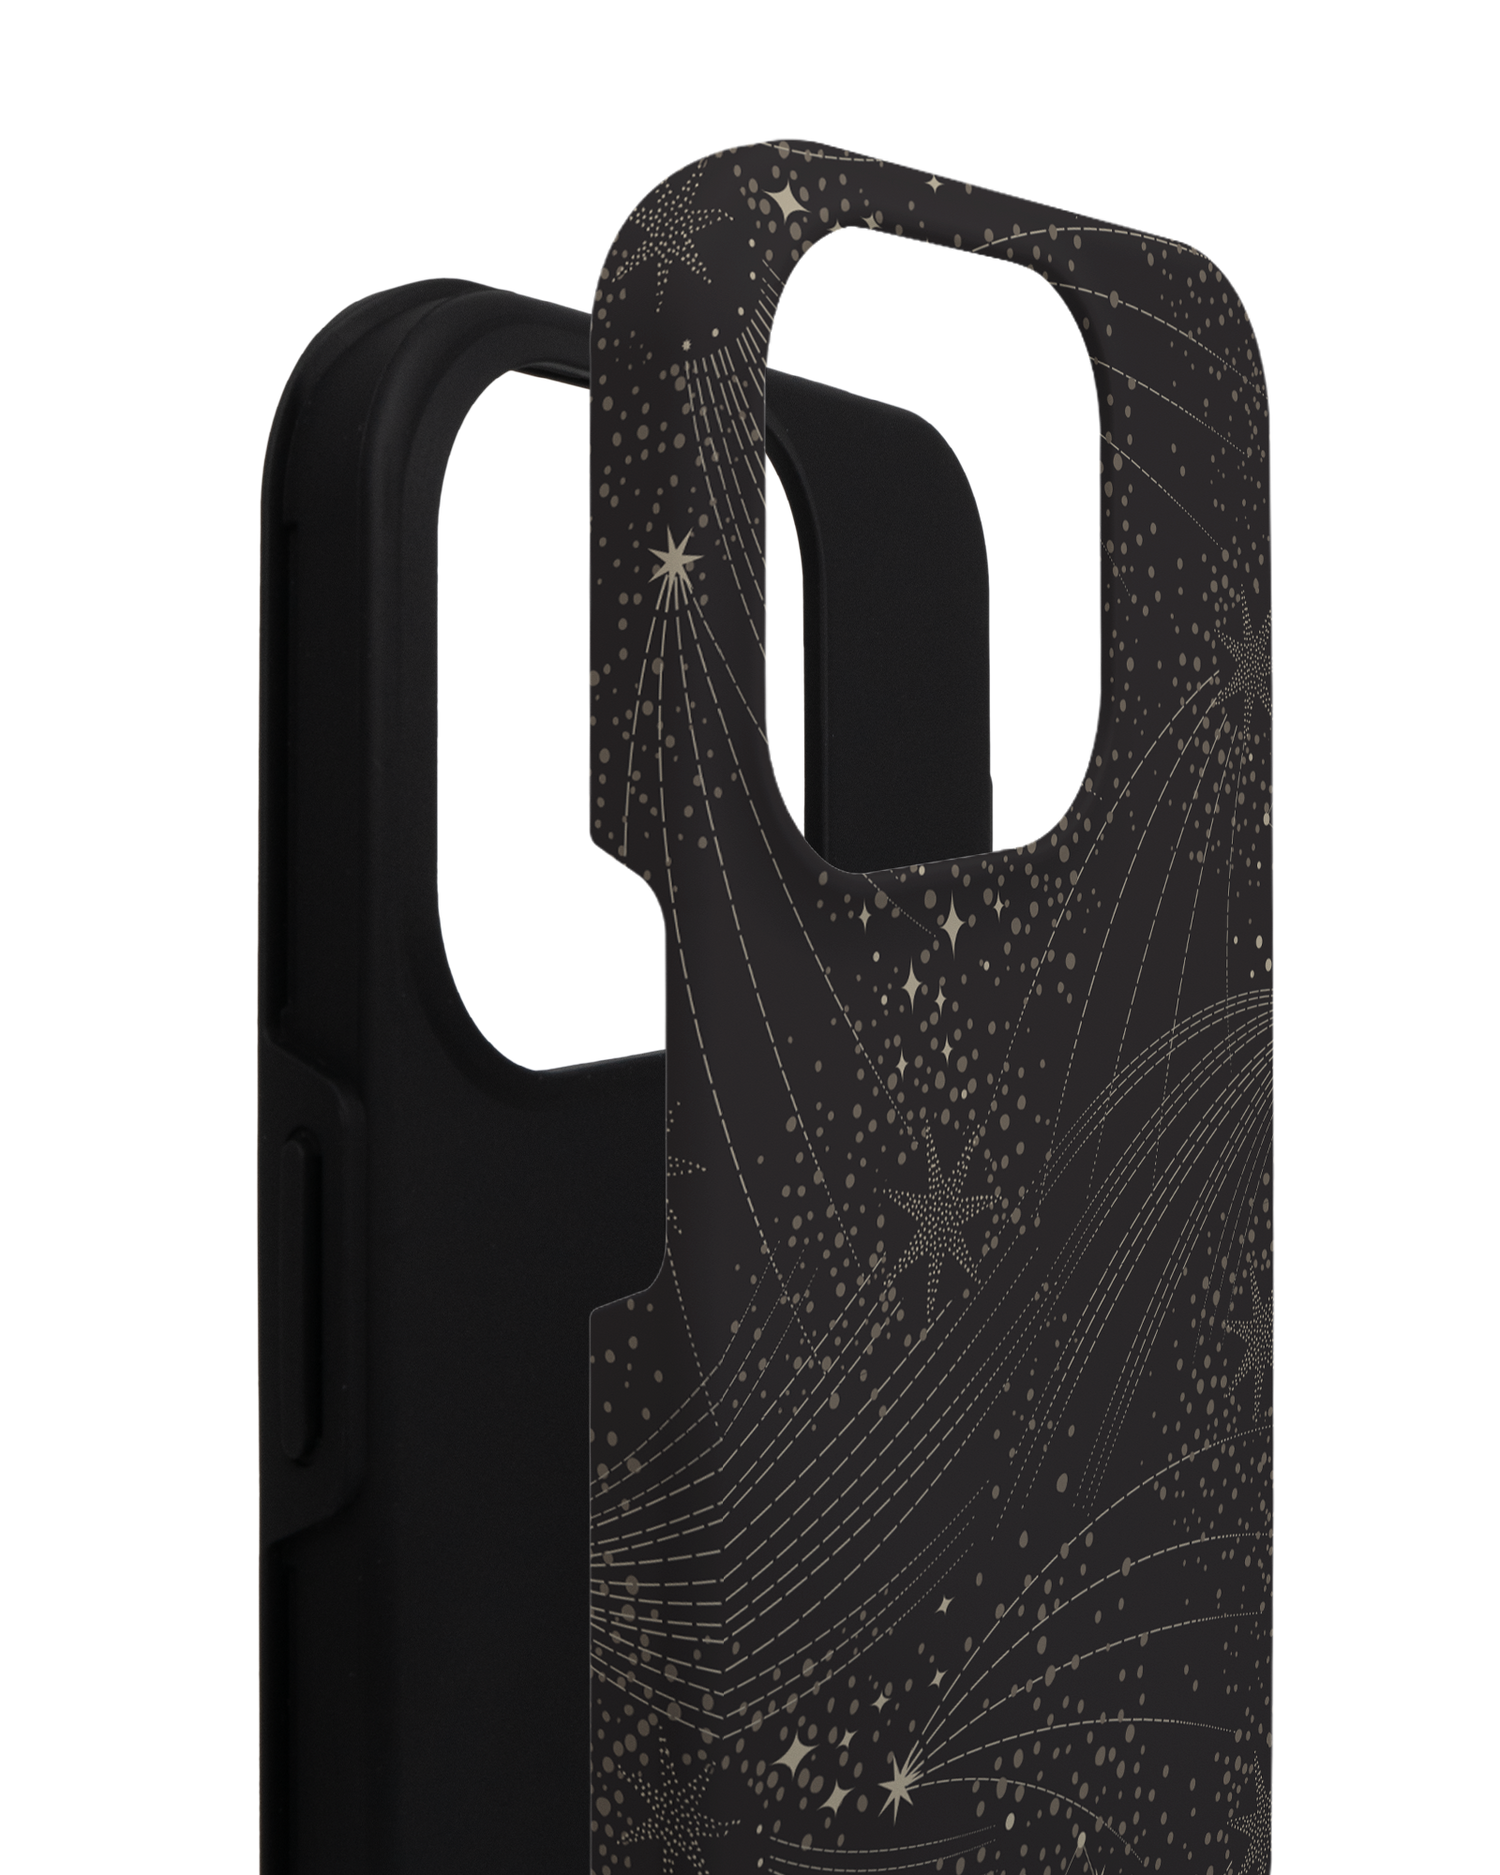 Make a Wish Star Premium Phone Case for Apple iPhone 14 Pro consisting of 2 parts